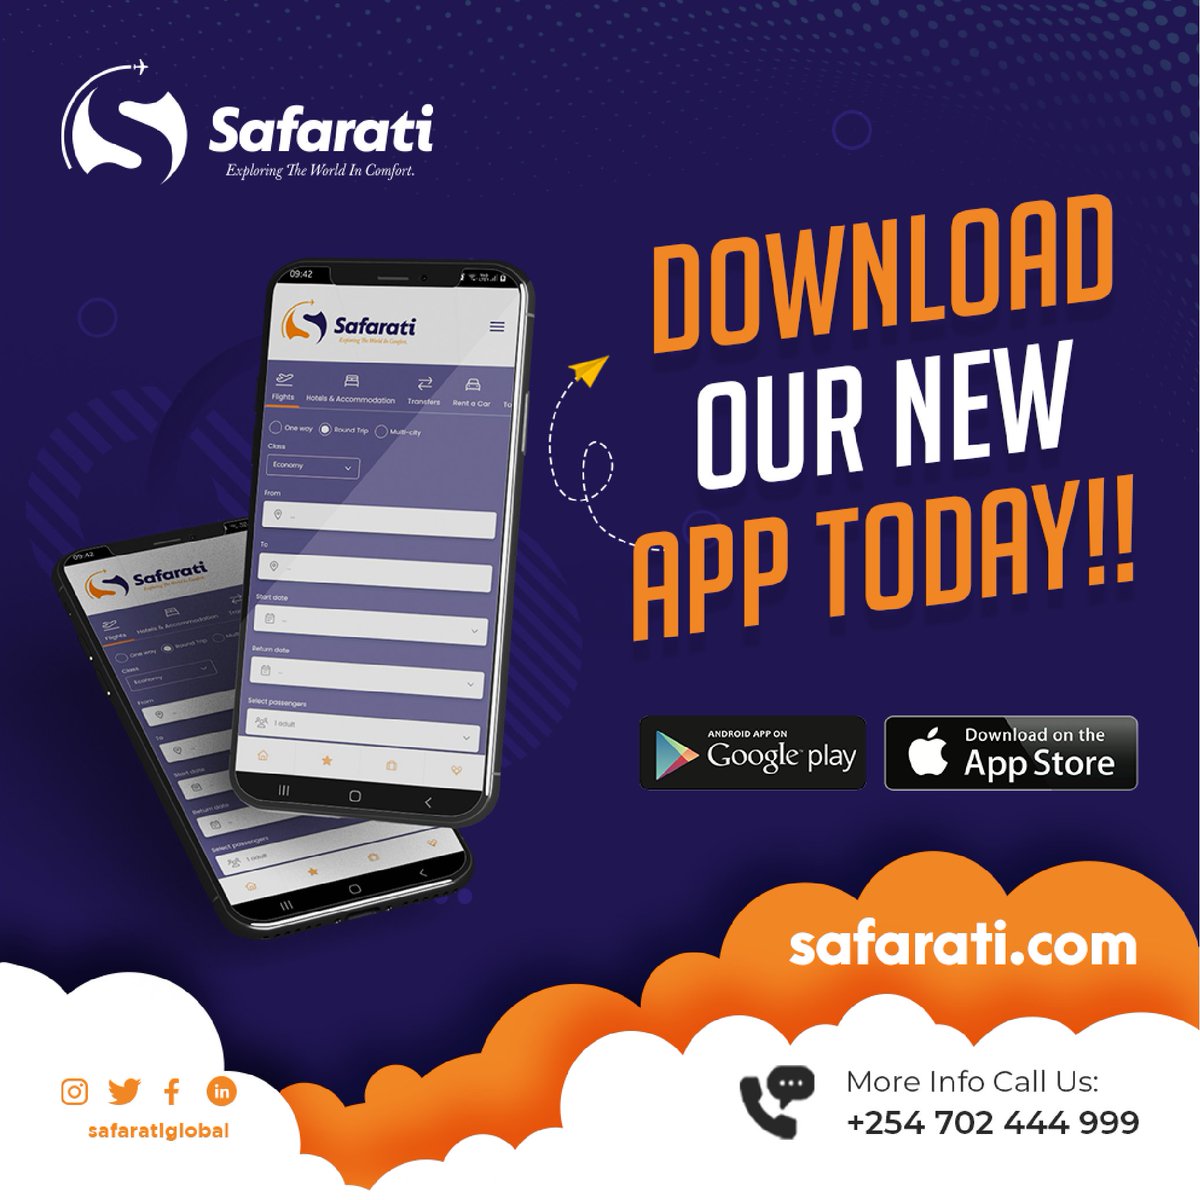 Download the Safarati App today on your Android and iOS now and enjoy the convenience of booking on the go.
#Safarati#bookingmadeeasy#traveldeals#vacation#beach#destination#luxurytravel